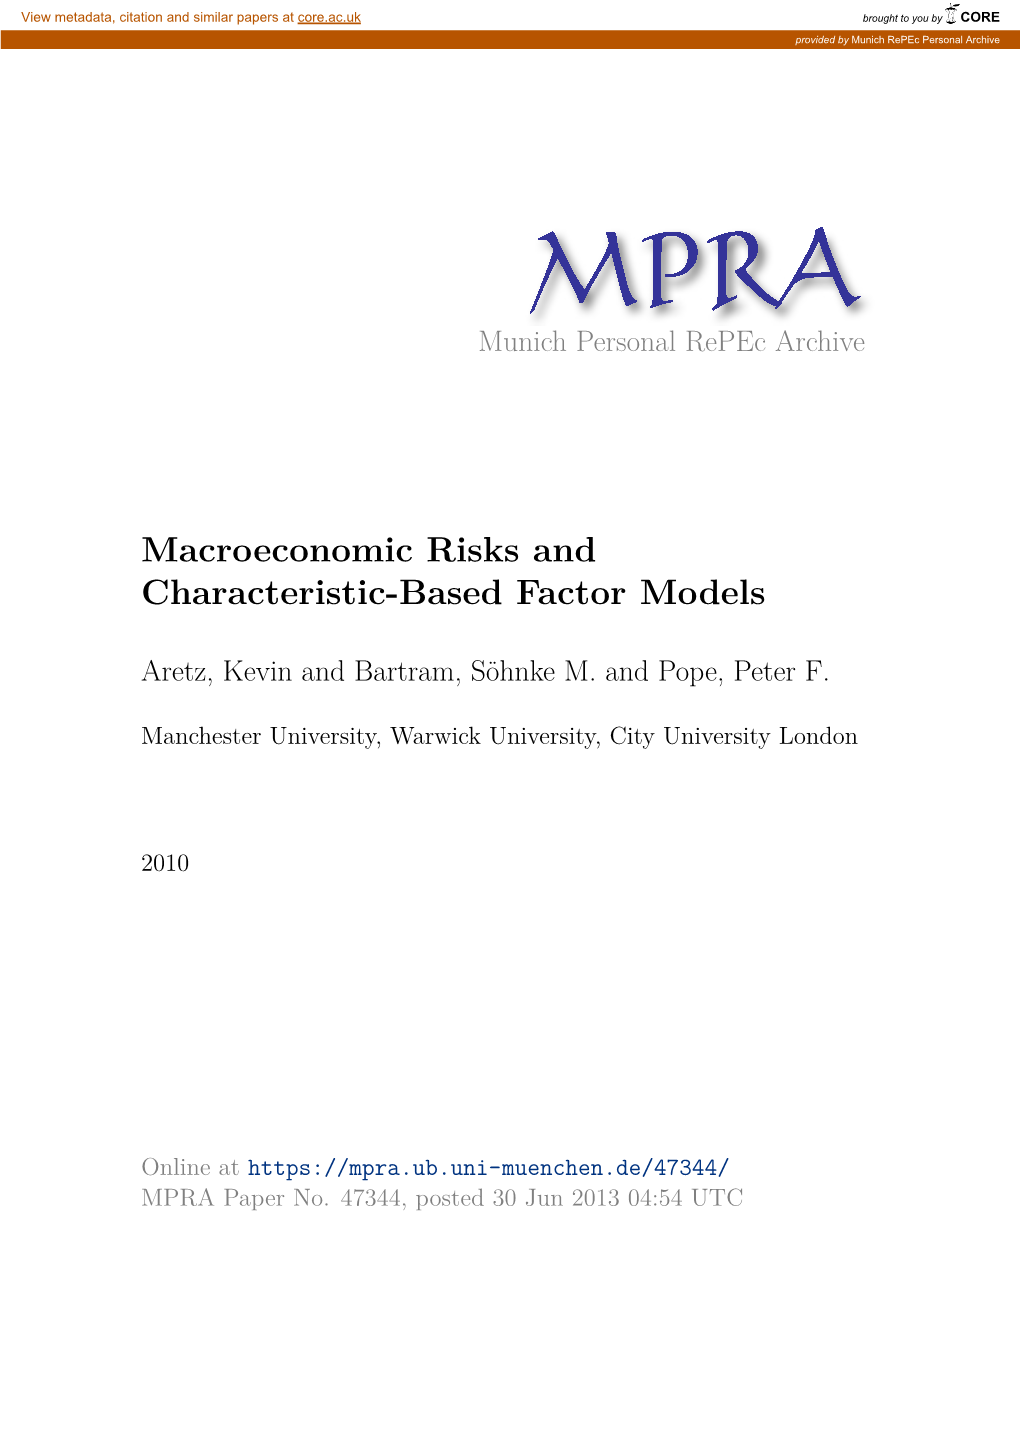 Macroeconomic Risks and Characteristic-Based Factor Models